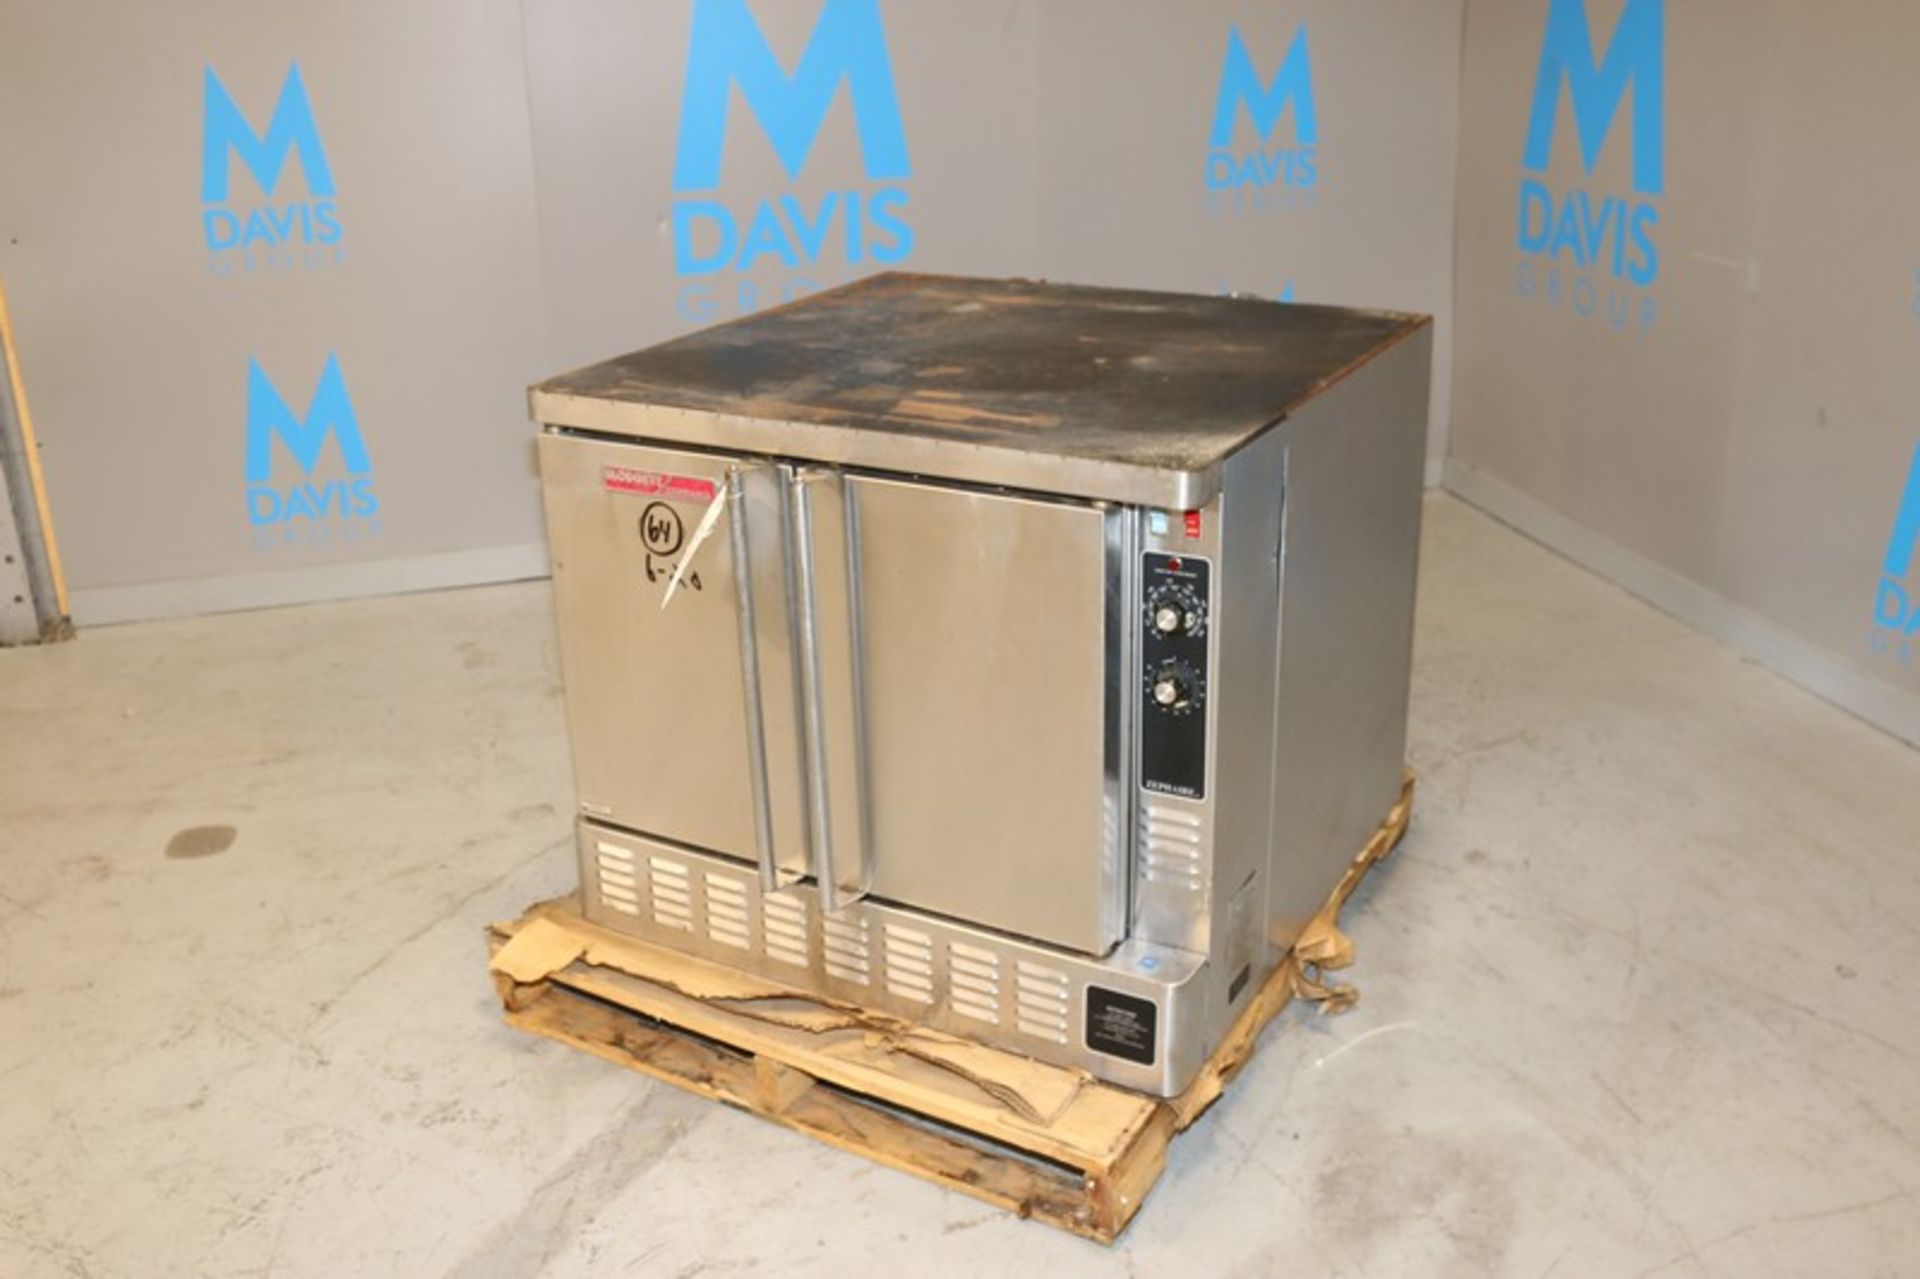 Blodgett/Zephaire S/S Double Door Oven, with (6) Internal Racks, Overall Dims.: Aprox. 43" L x 38" W - Image 2 of 5